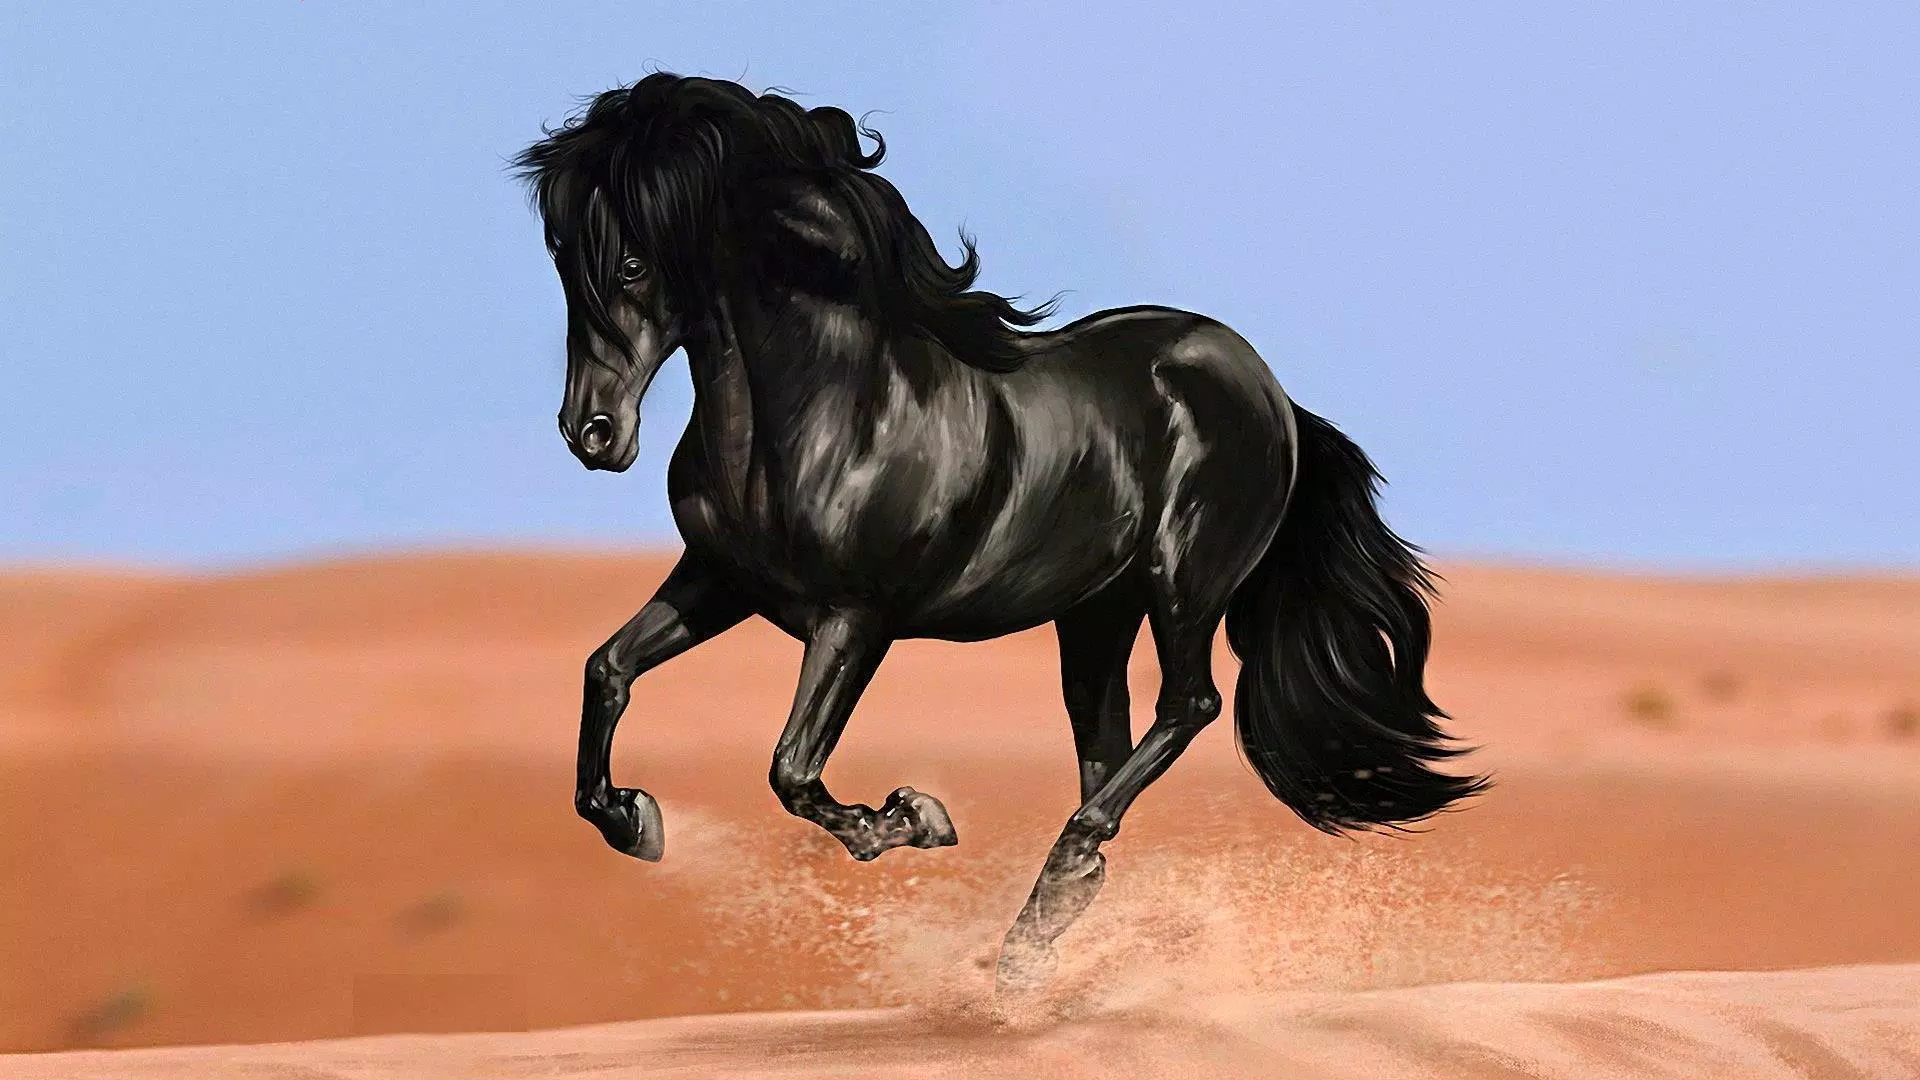 Black horse animal wallpapers apk for android download